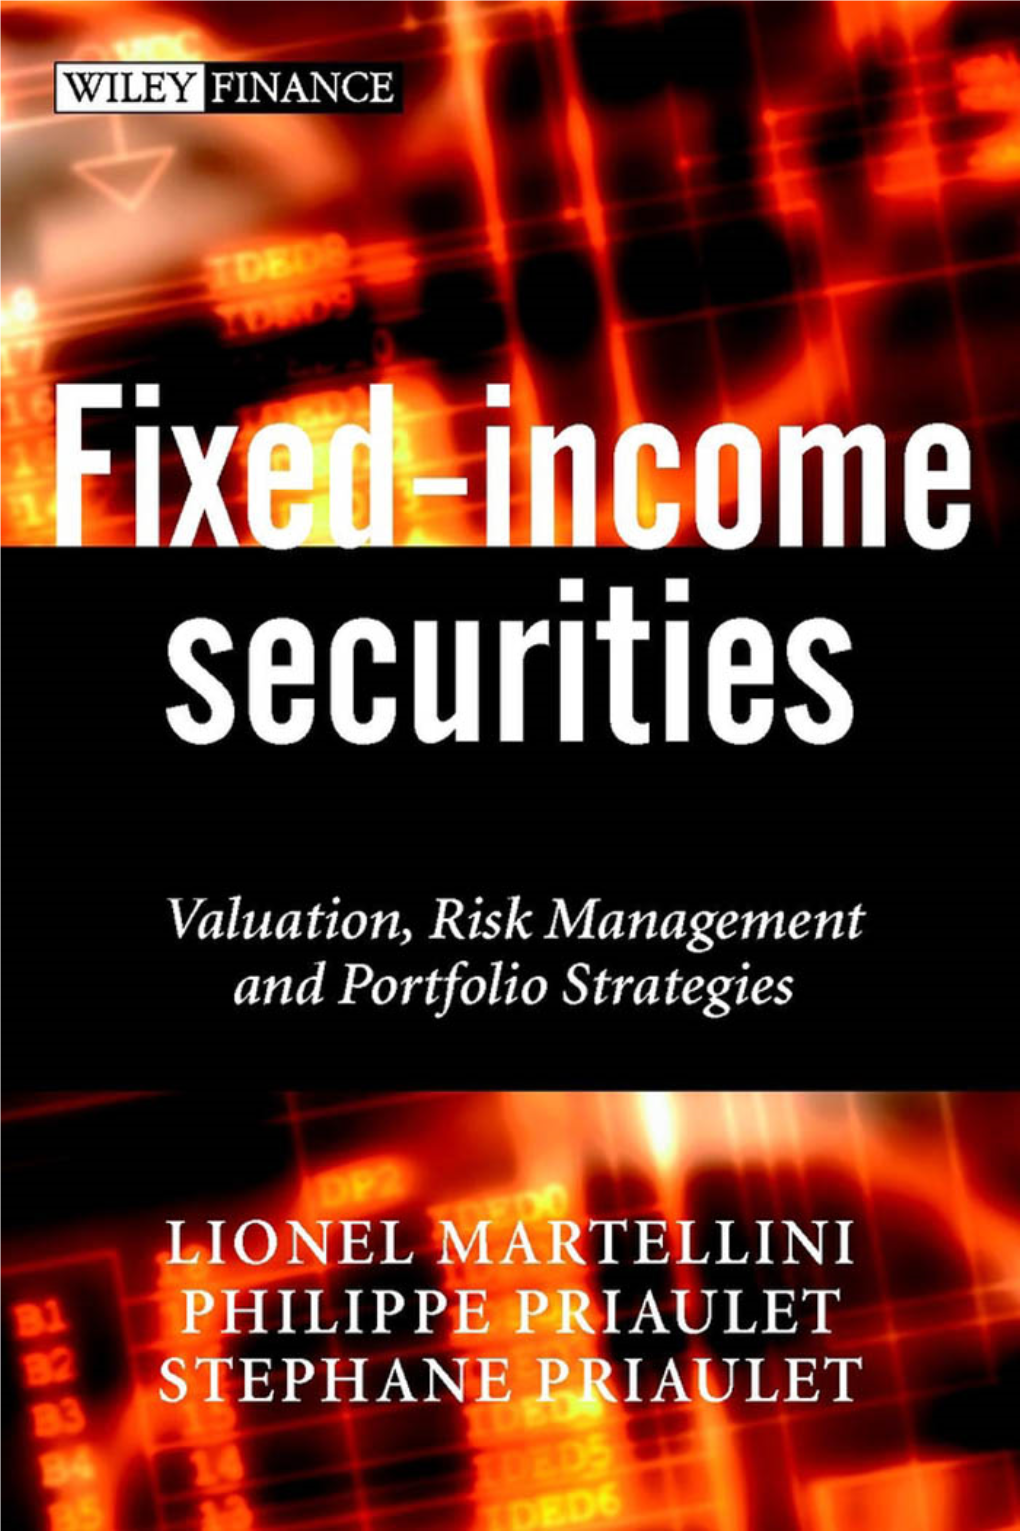 Fixed-Income Securities Valuation, Risk Management and Portfolio Strategies